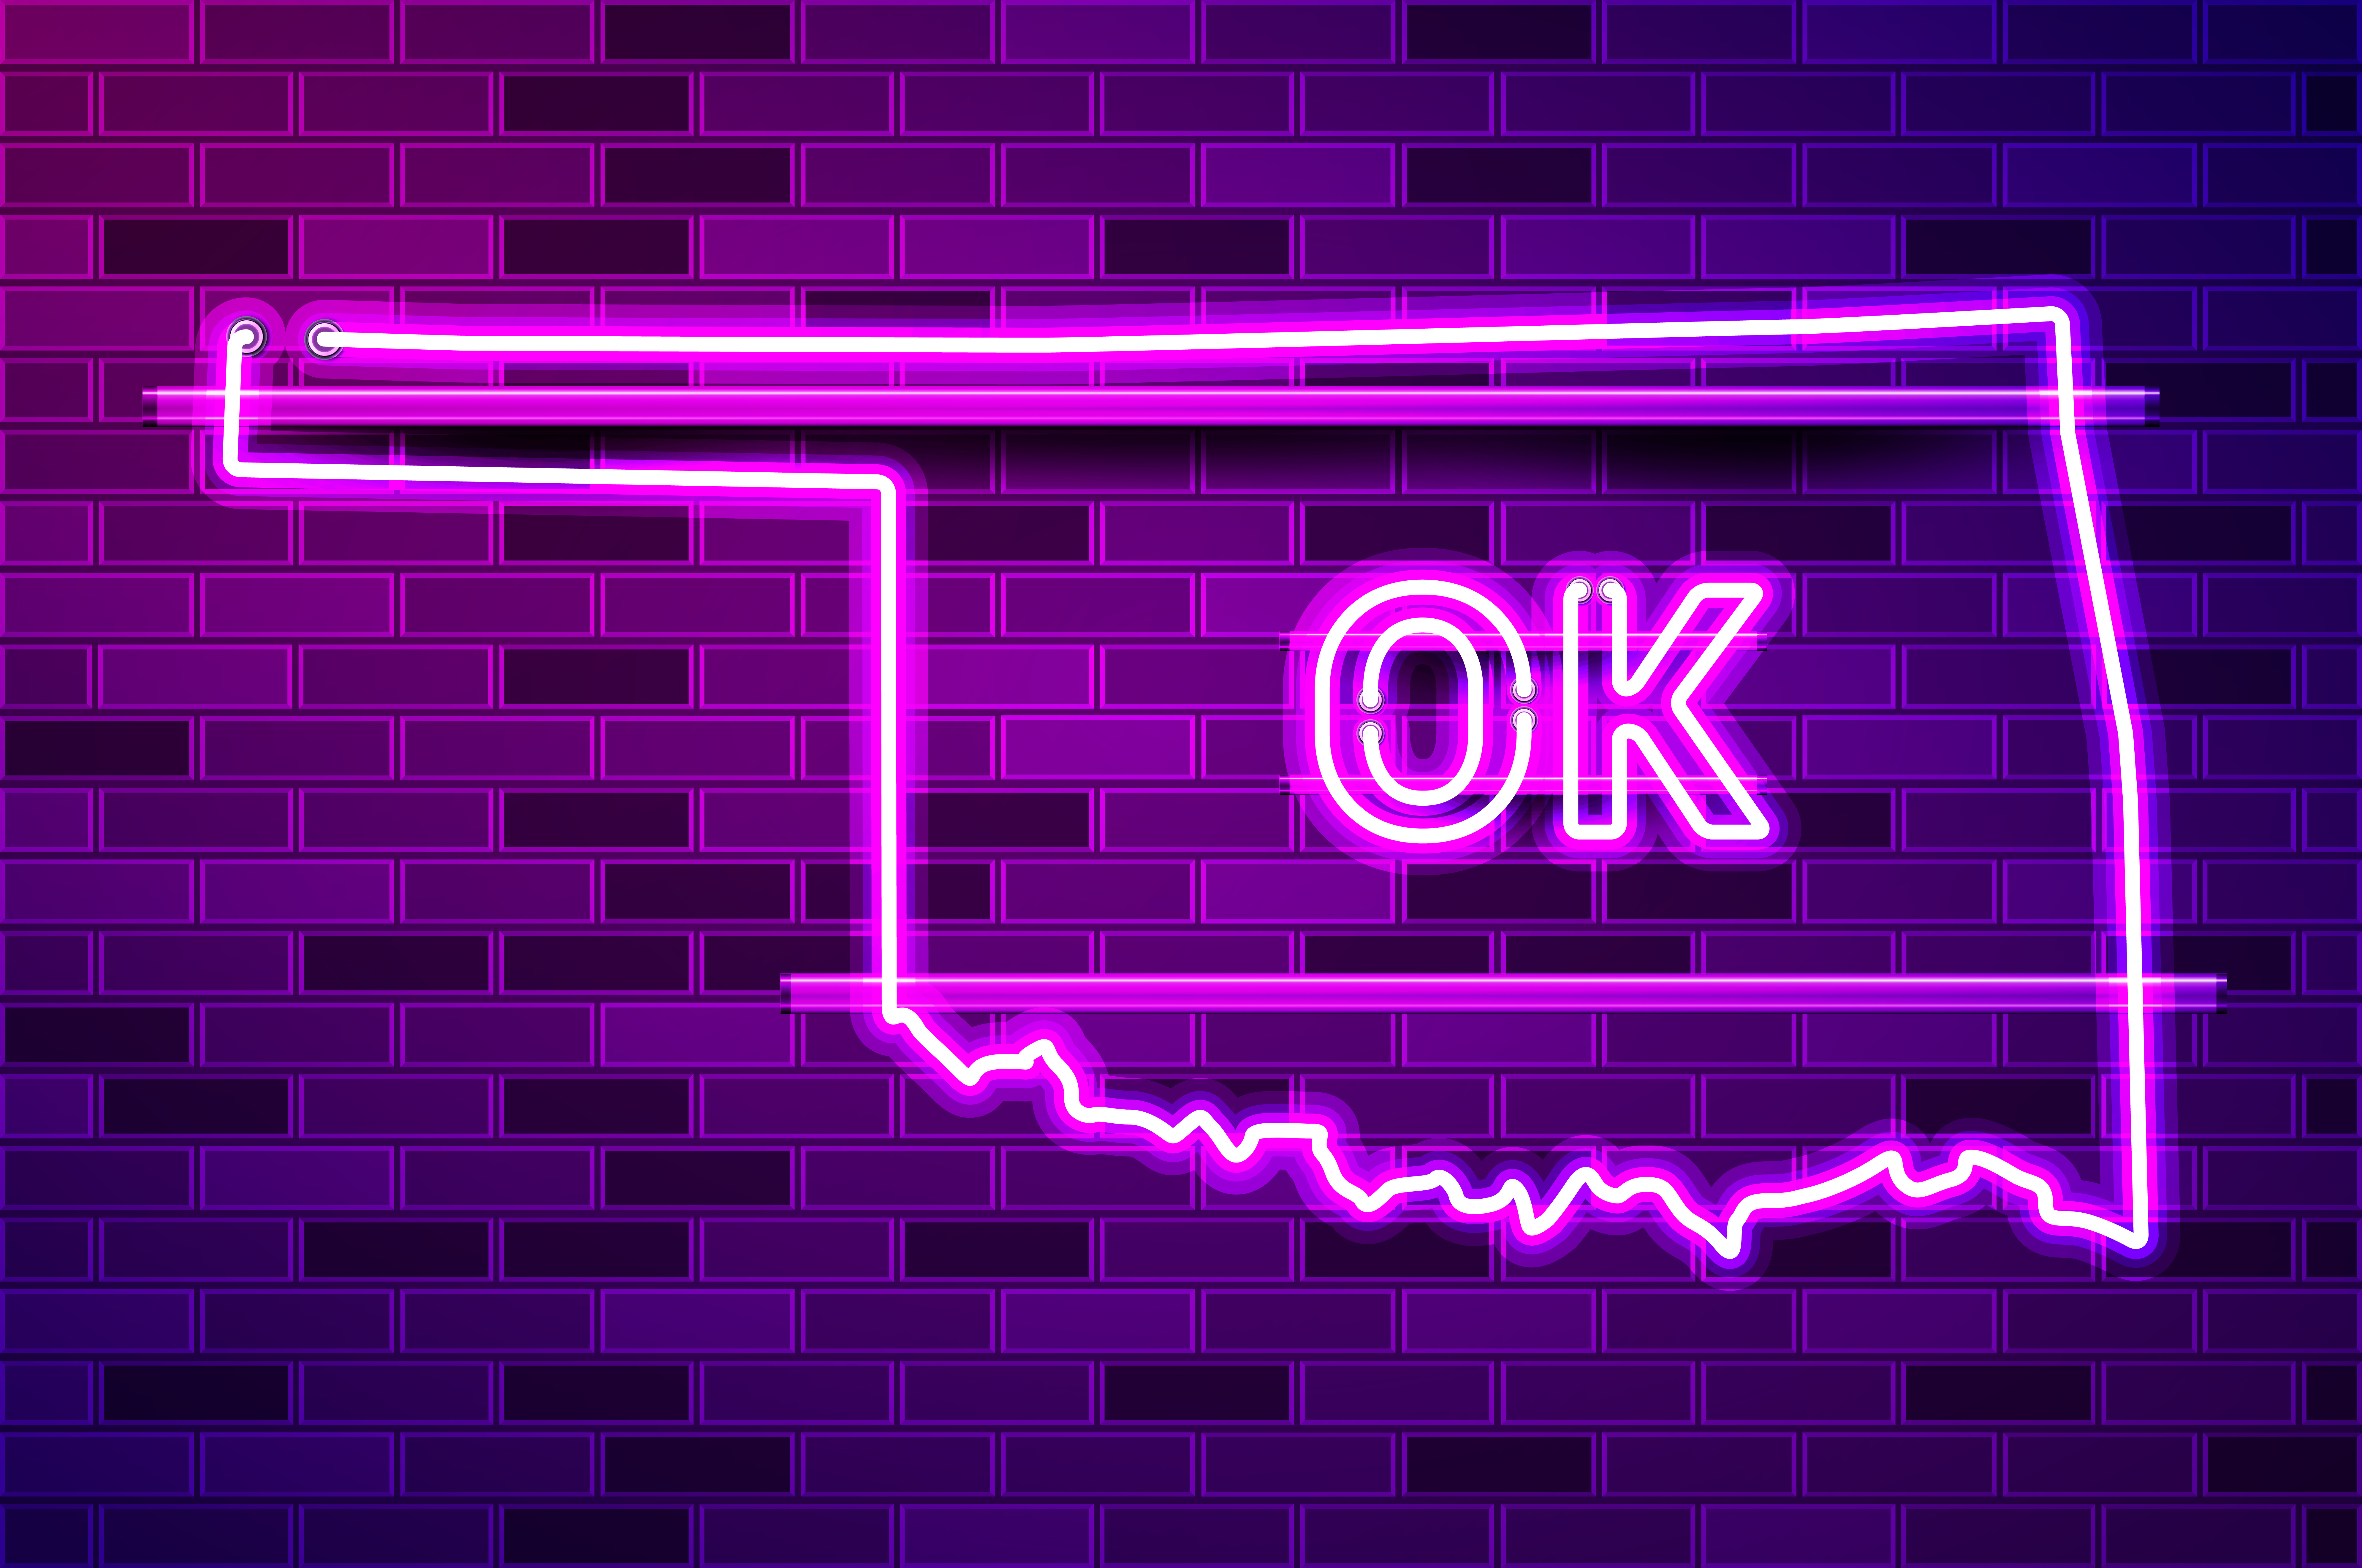 Oklahoma US state glowing neon lamp sign. Realistic vector illustration. Purple brick wall, violet glow, metal holders.. Oklahoma US state glowing purple neon lamp sign